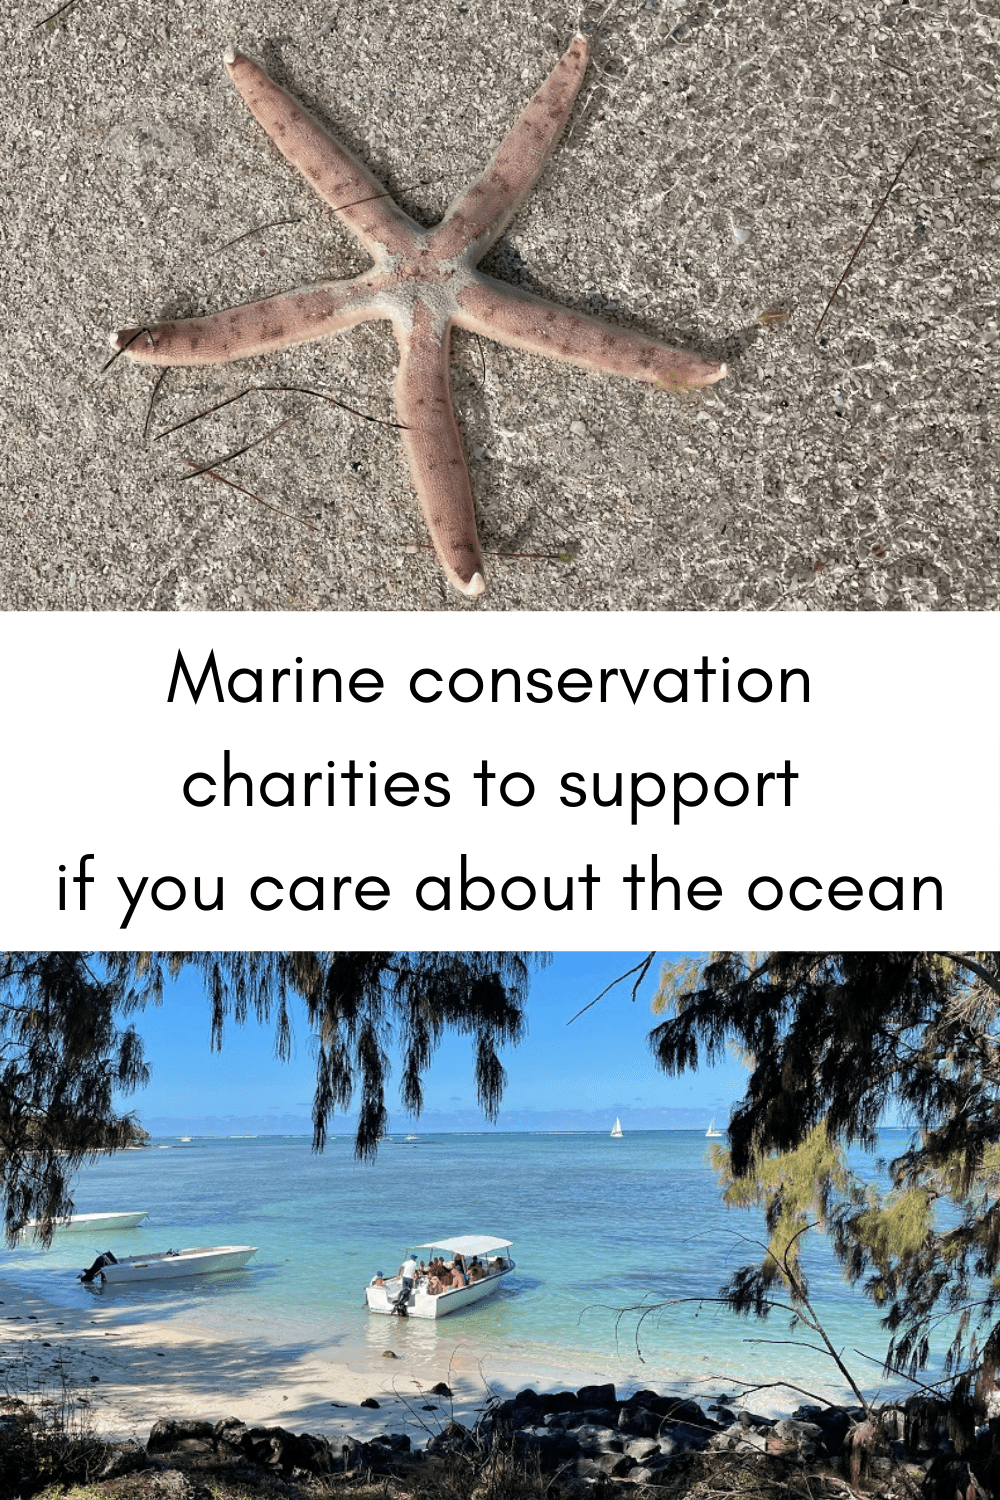 Marine conservation charities to support